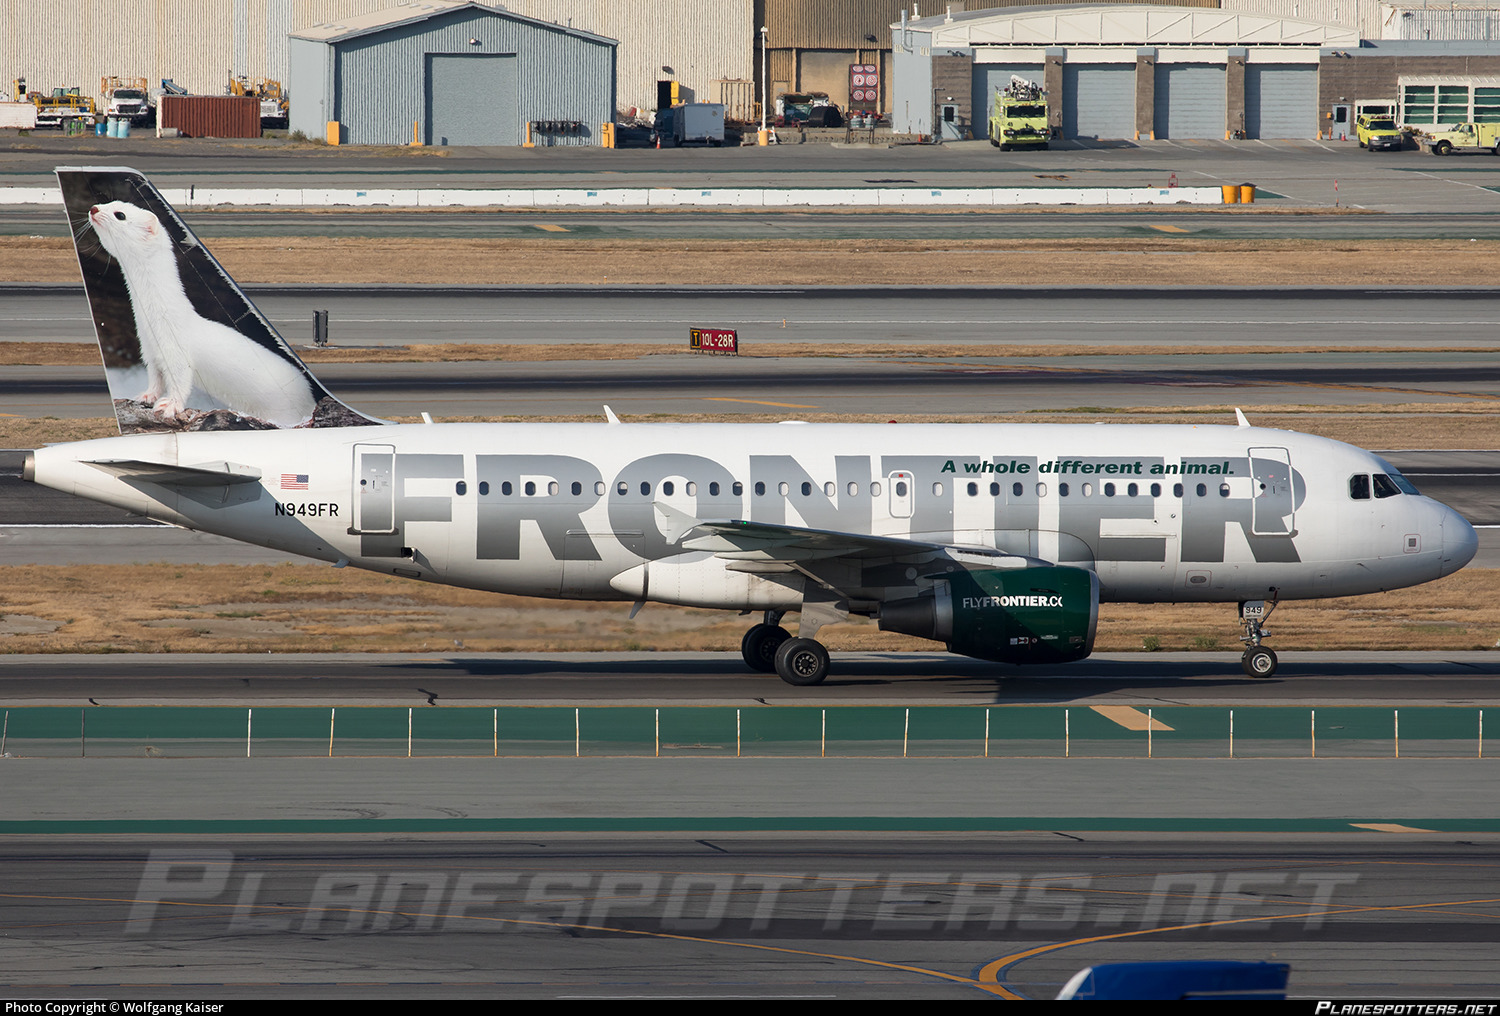 Frontier airlines booking